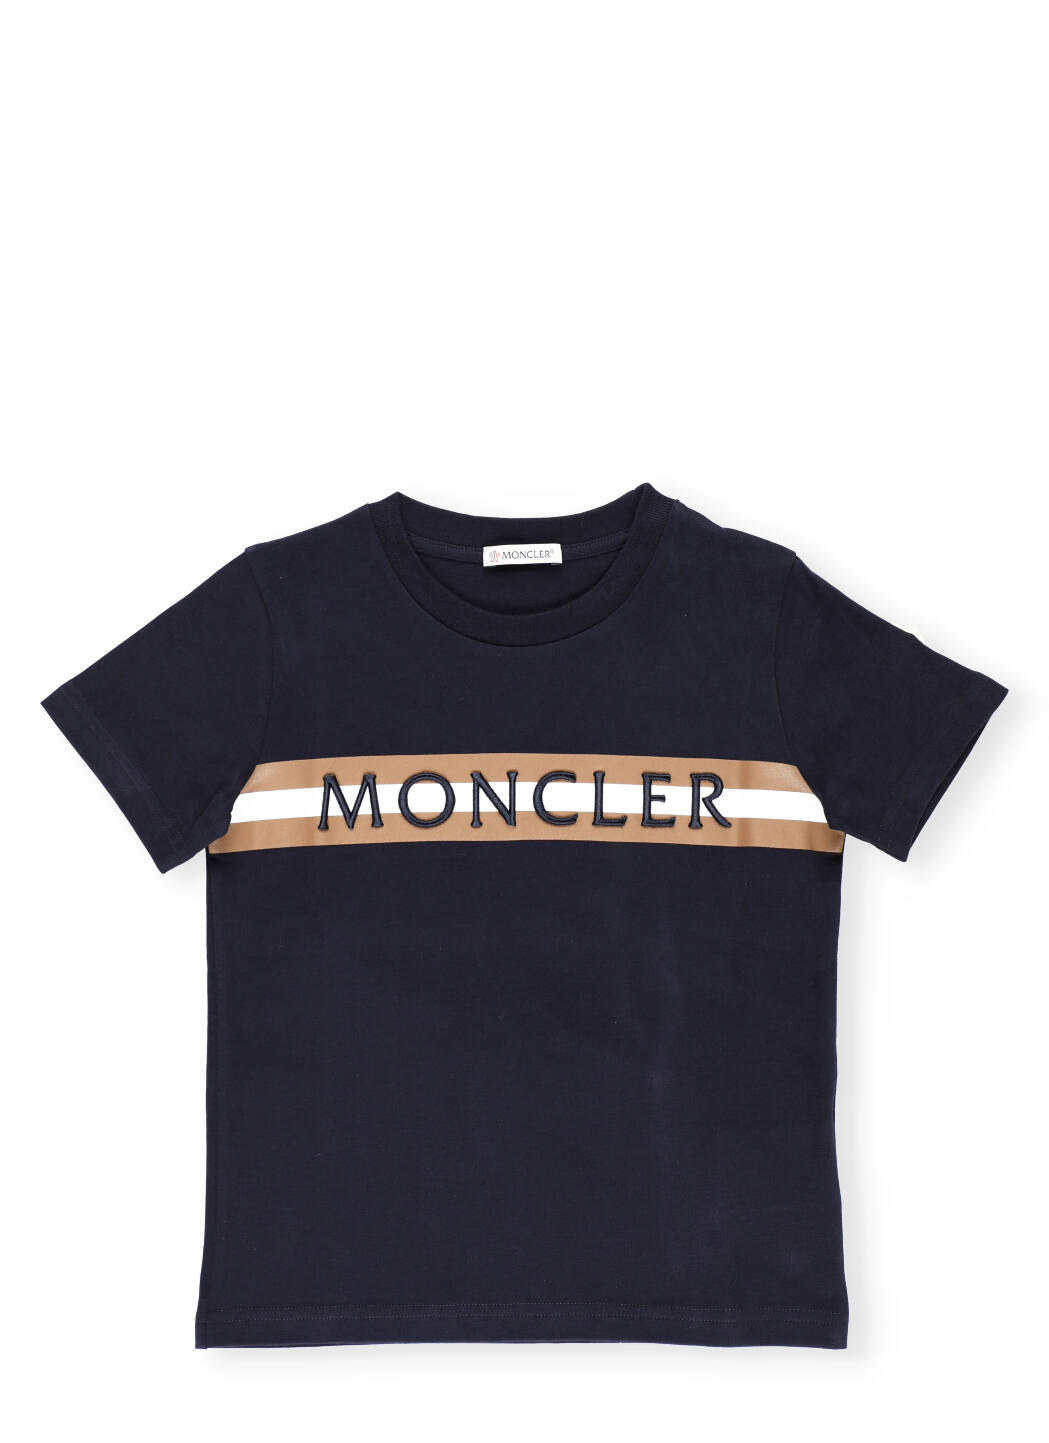 Moncler Moncler Embroidery T-shirt